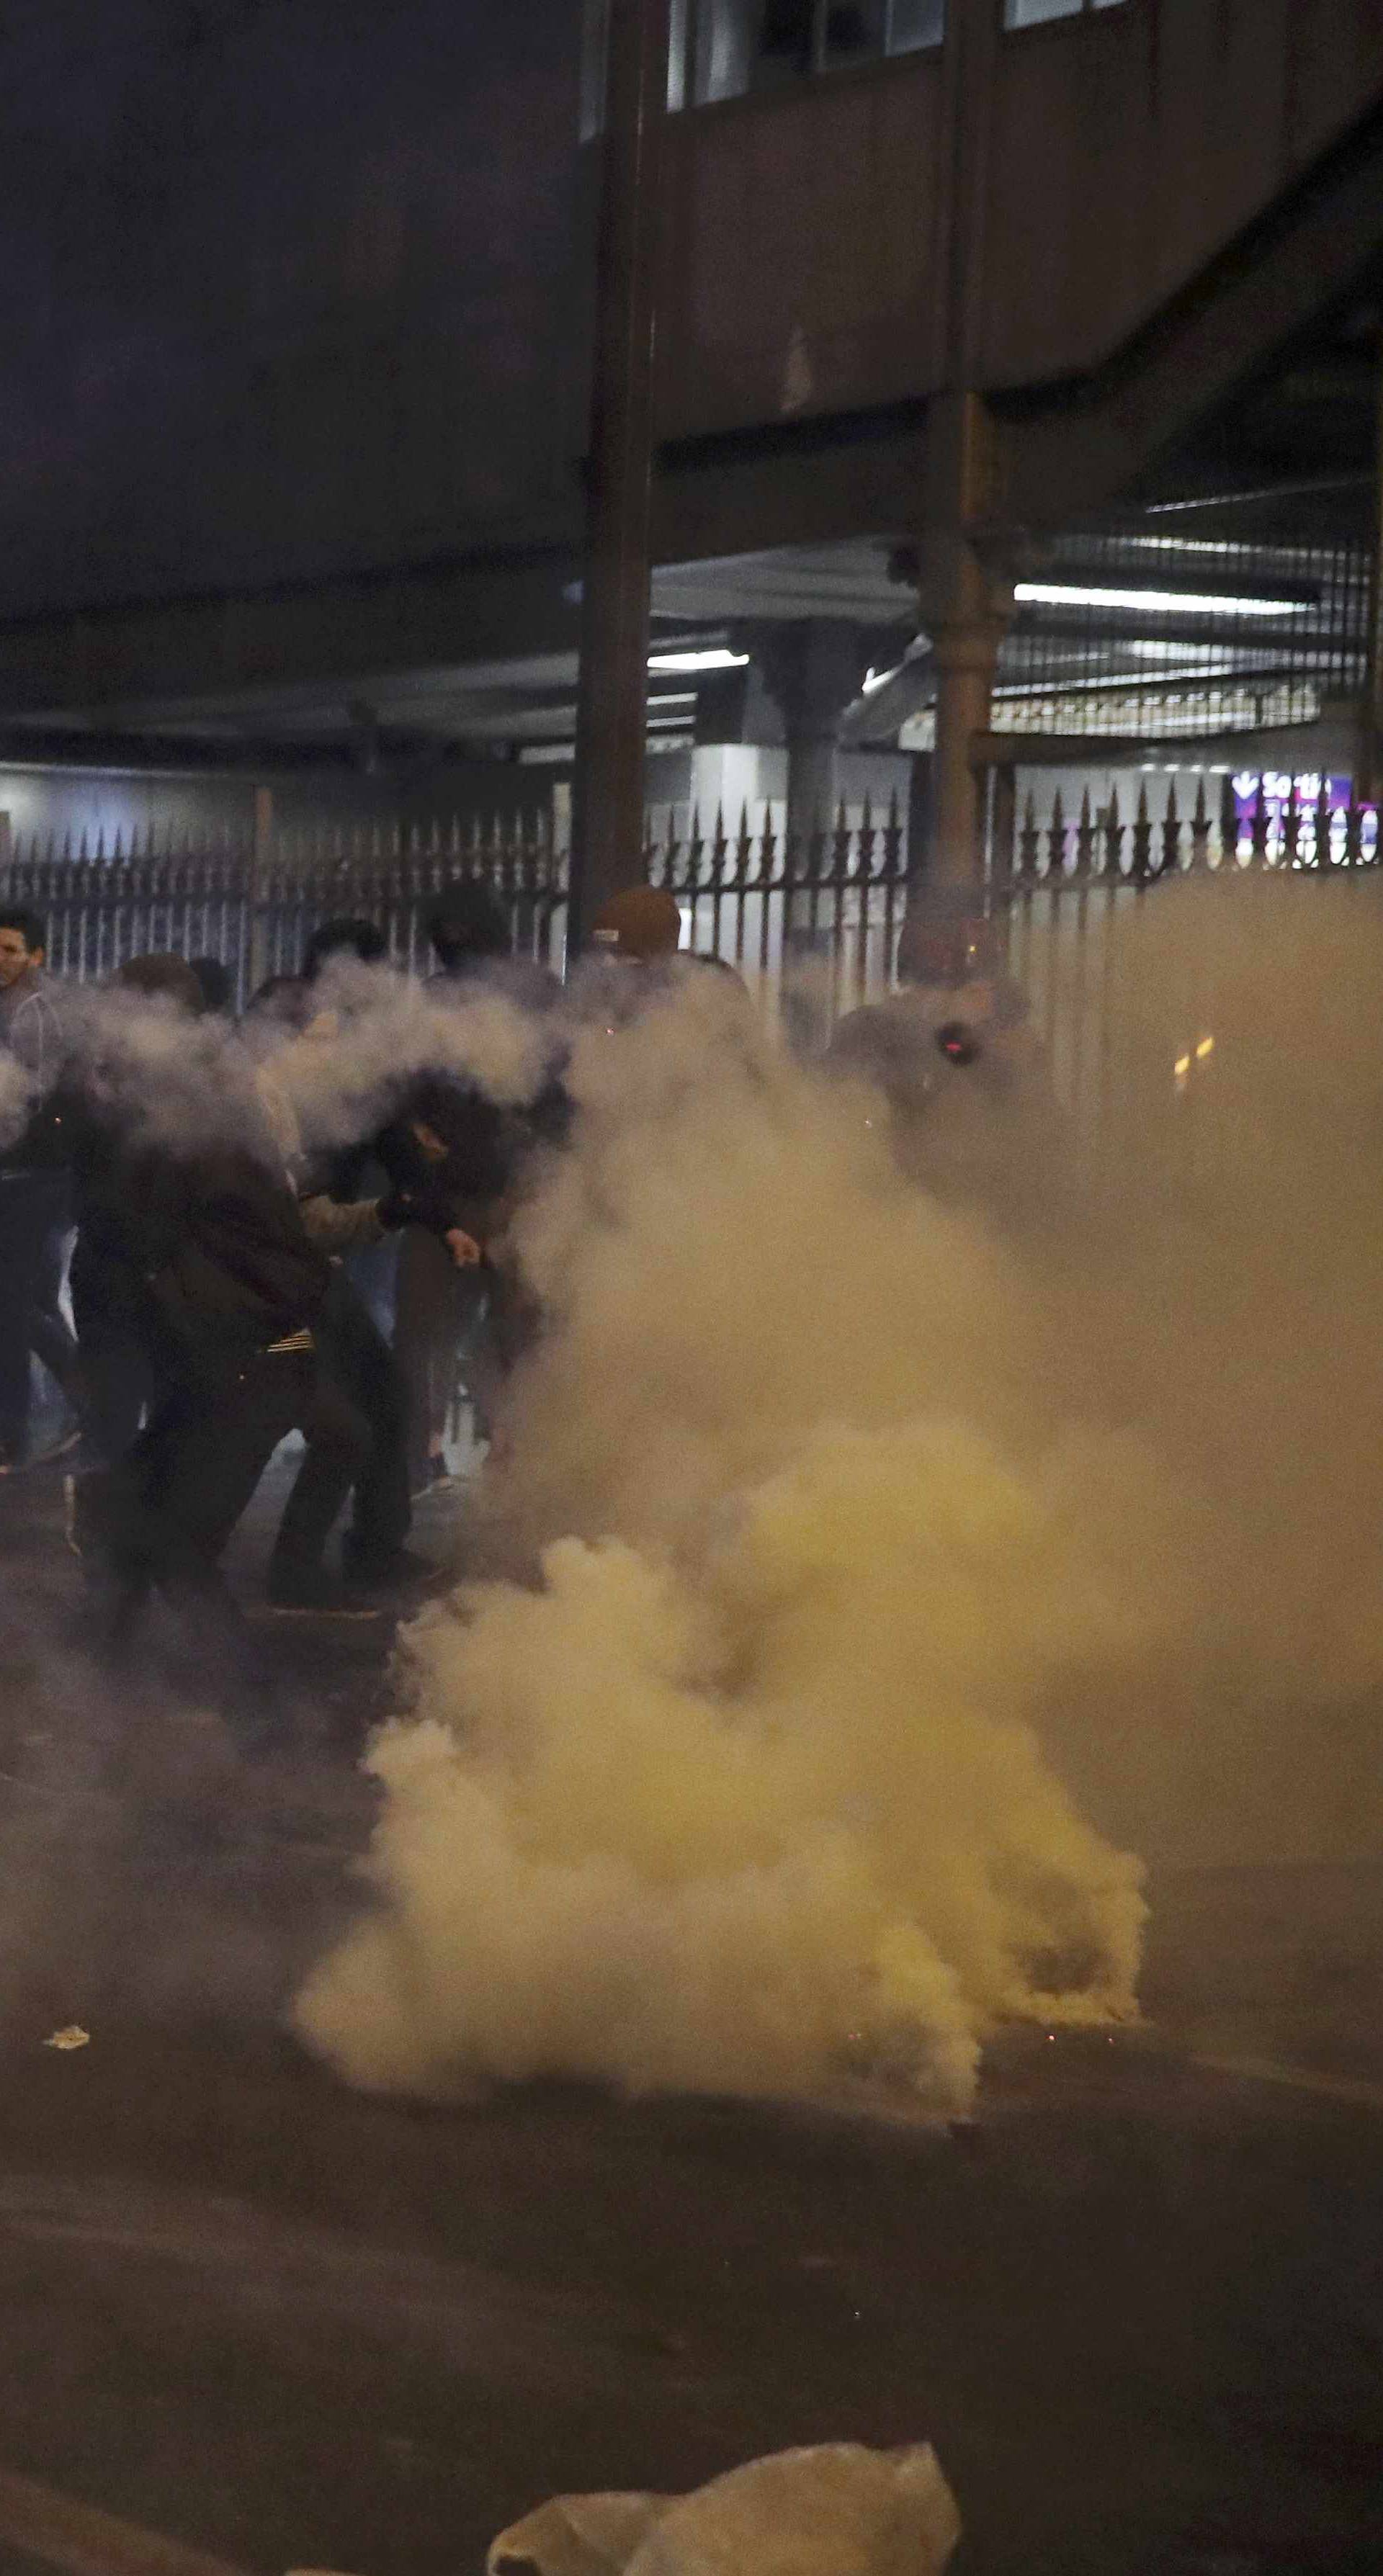  Clouds of tear gas surround people during a protest against police brutality after a young black man, 22-year-old youth worker named Theo, was severly injured, as people attend a demonstration in Paris